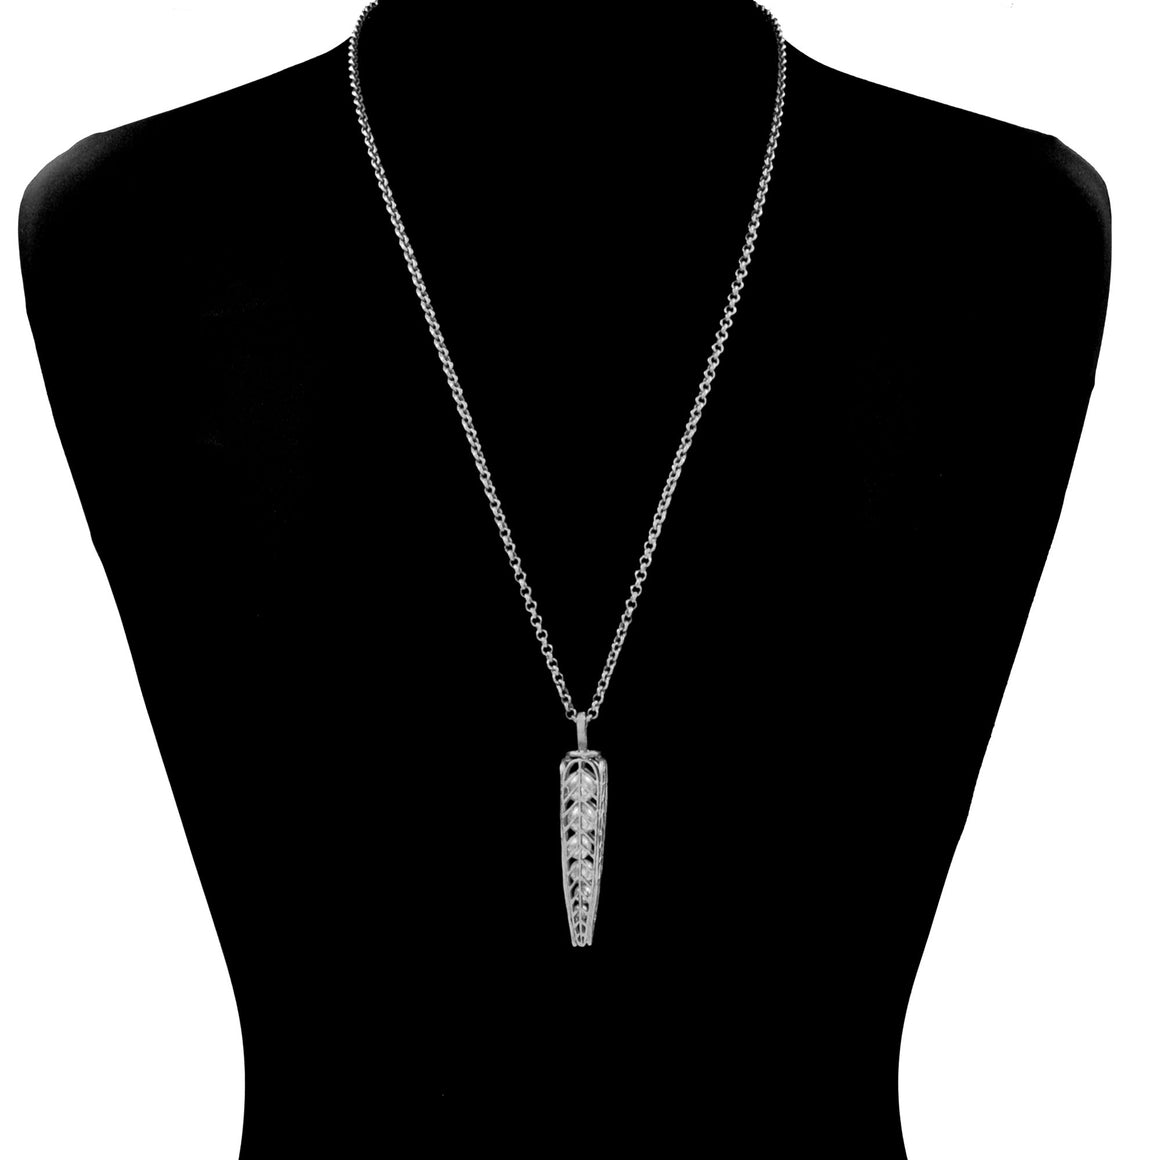 Caged Pearl Chevron Leaf Necklace - Platinum Silver